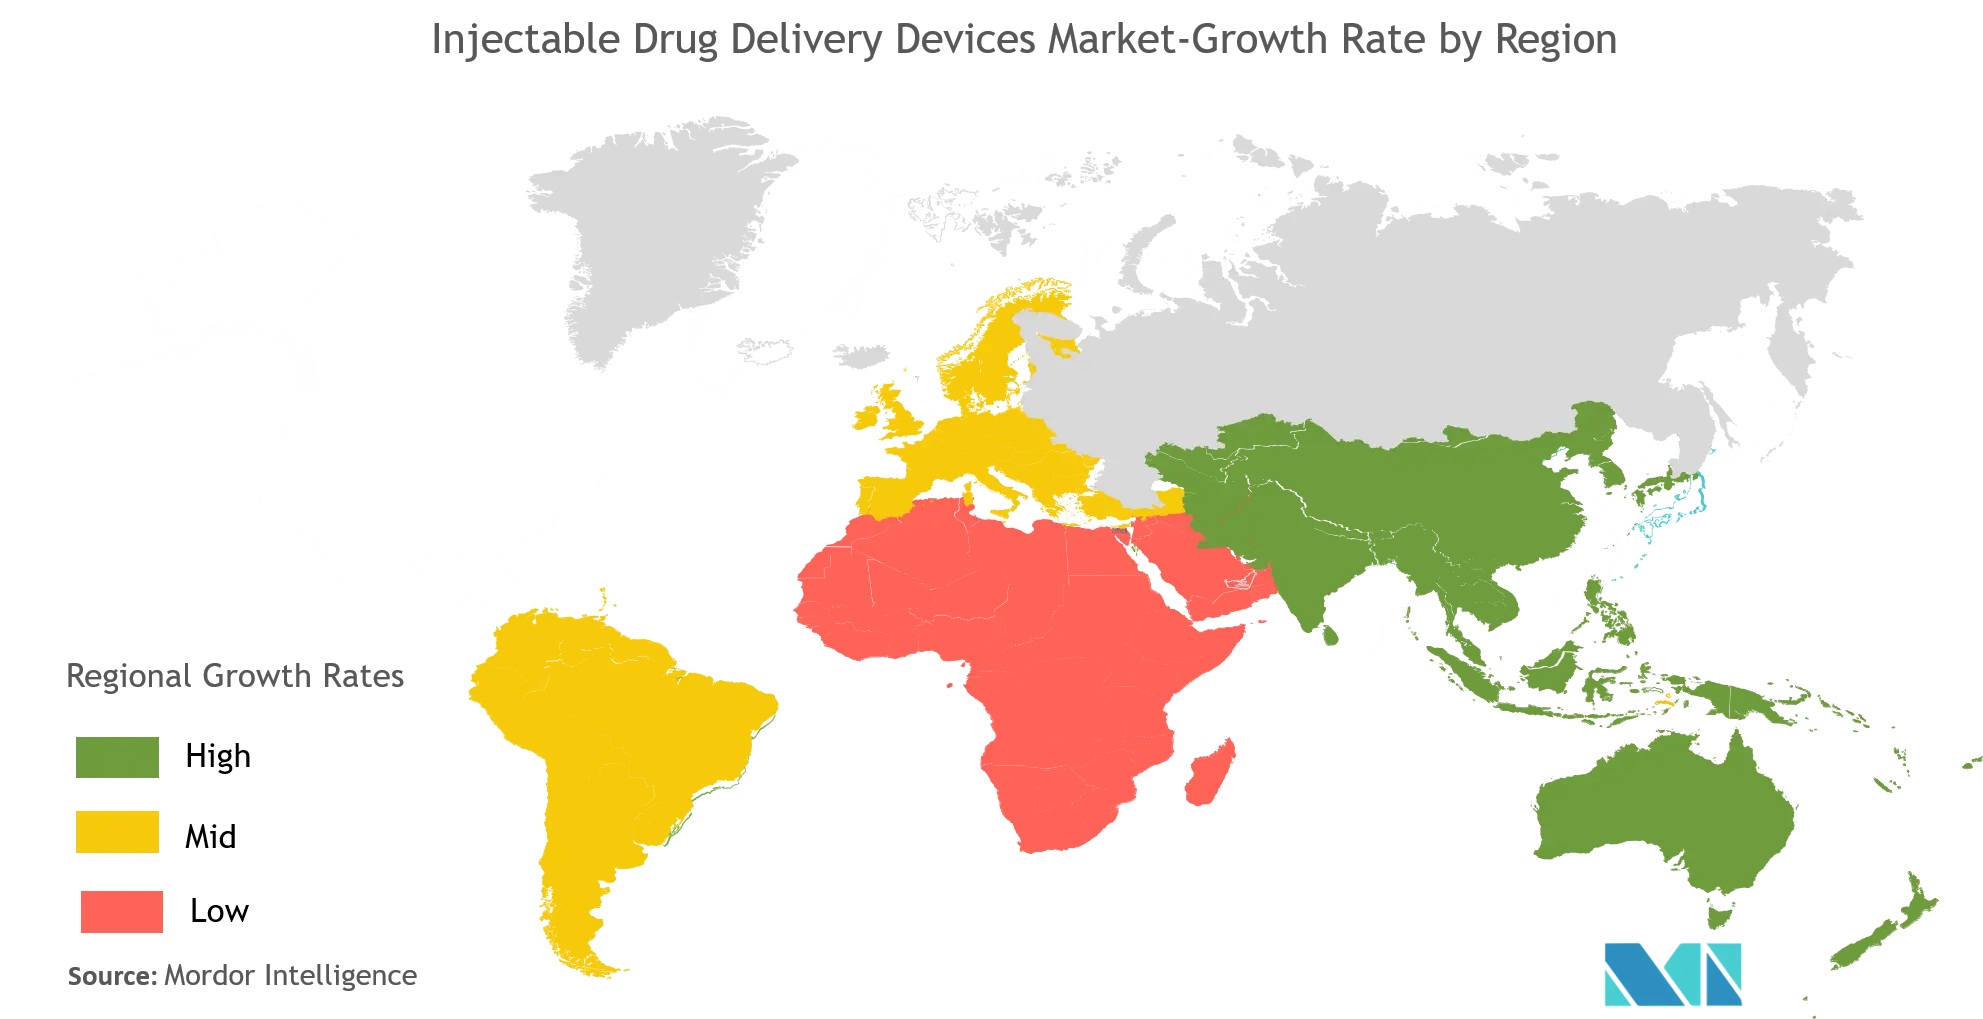  Injectable drug delivery devices market Growth by Region